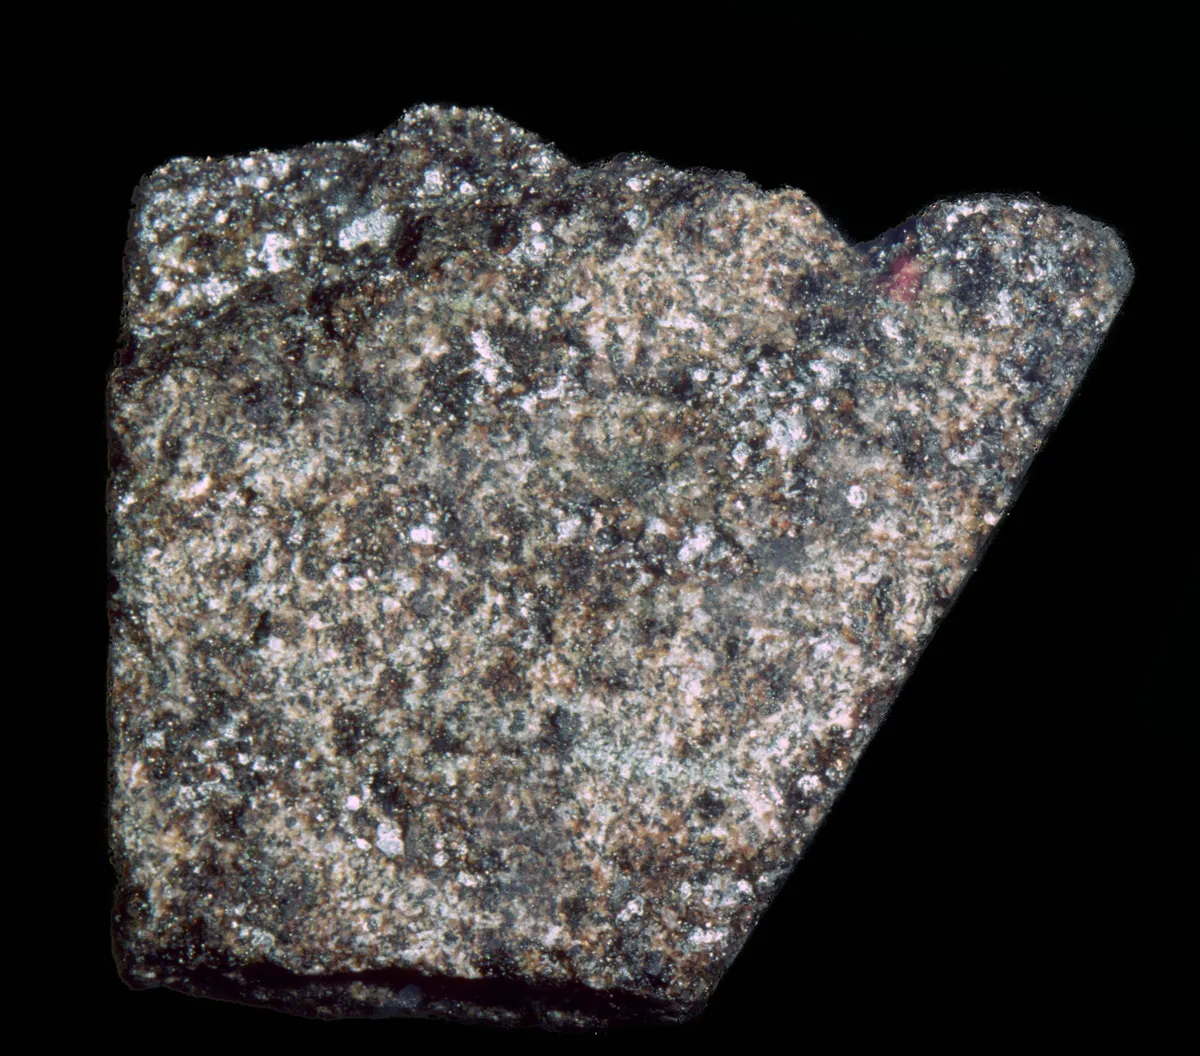 A sample of basalt collected during the Apollo 14 mission and brought back to Earth. Photo by CM Dixon/Print Collector/Getty Images)